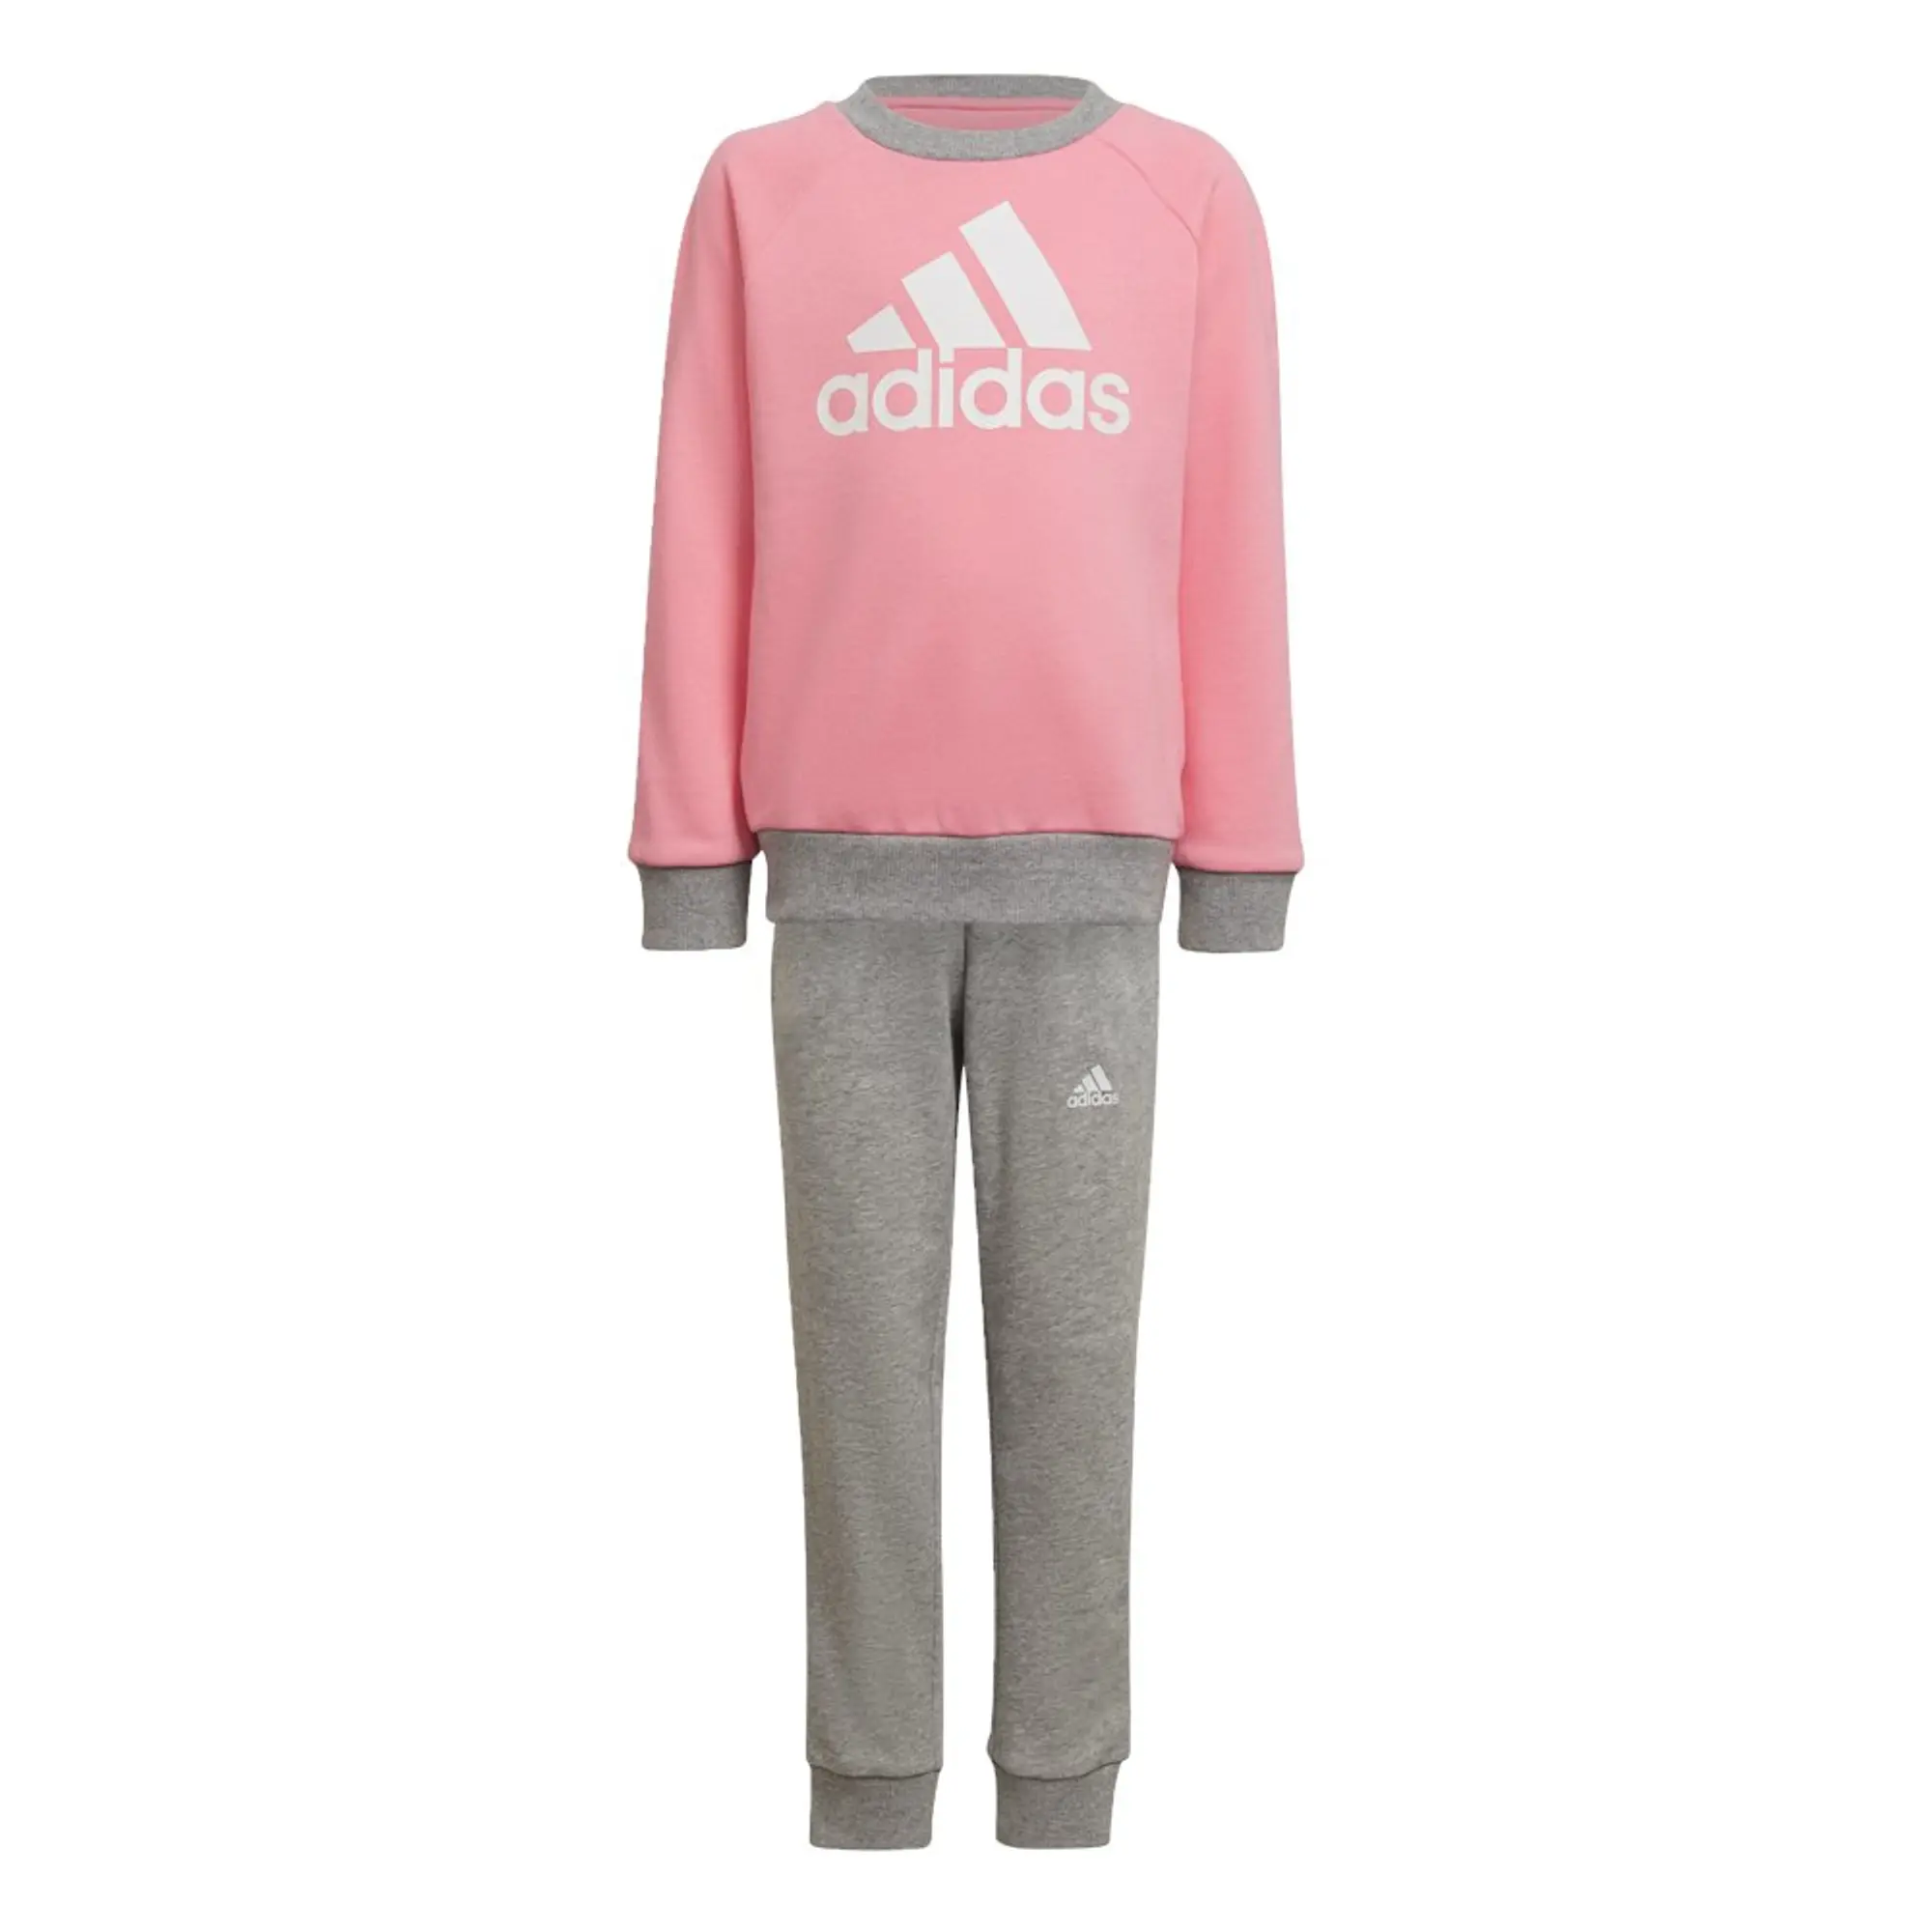 adidas Jogg Ft In24 - Pink